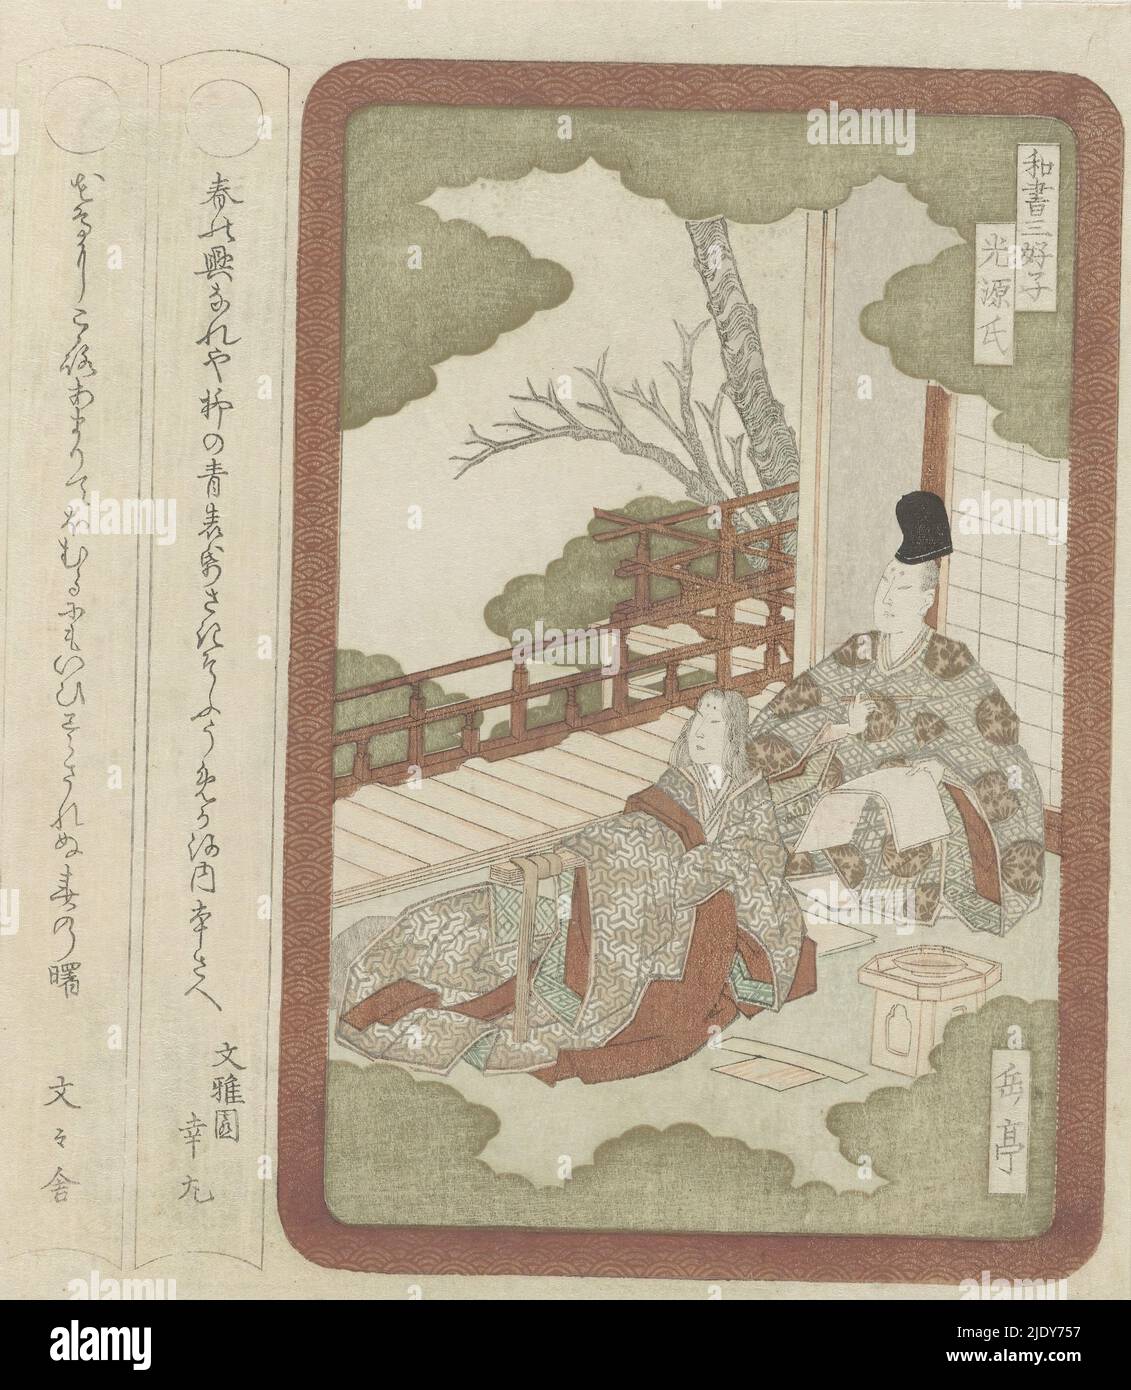 Prince Genji with a court lady, Three gentlemen of Japanese literature (series title), Prince Genji and a court lady take inspiration, sitting on a veranda and looking out over a garden in spring. From the complete series of three surimonos, each depicting one of the 'three gentlemen of Japanese literature' in the presence of a lady. Scene from The Tale of Genji by Murasaki Shikibu., print maker: Yashima Gakutei, (mentioned on object), Japan, 1819 - 1820, paper, color woodcut, height 181 mm × width 207 mm Stock Photo